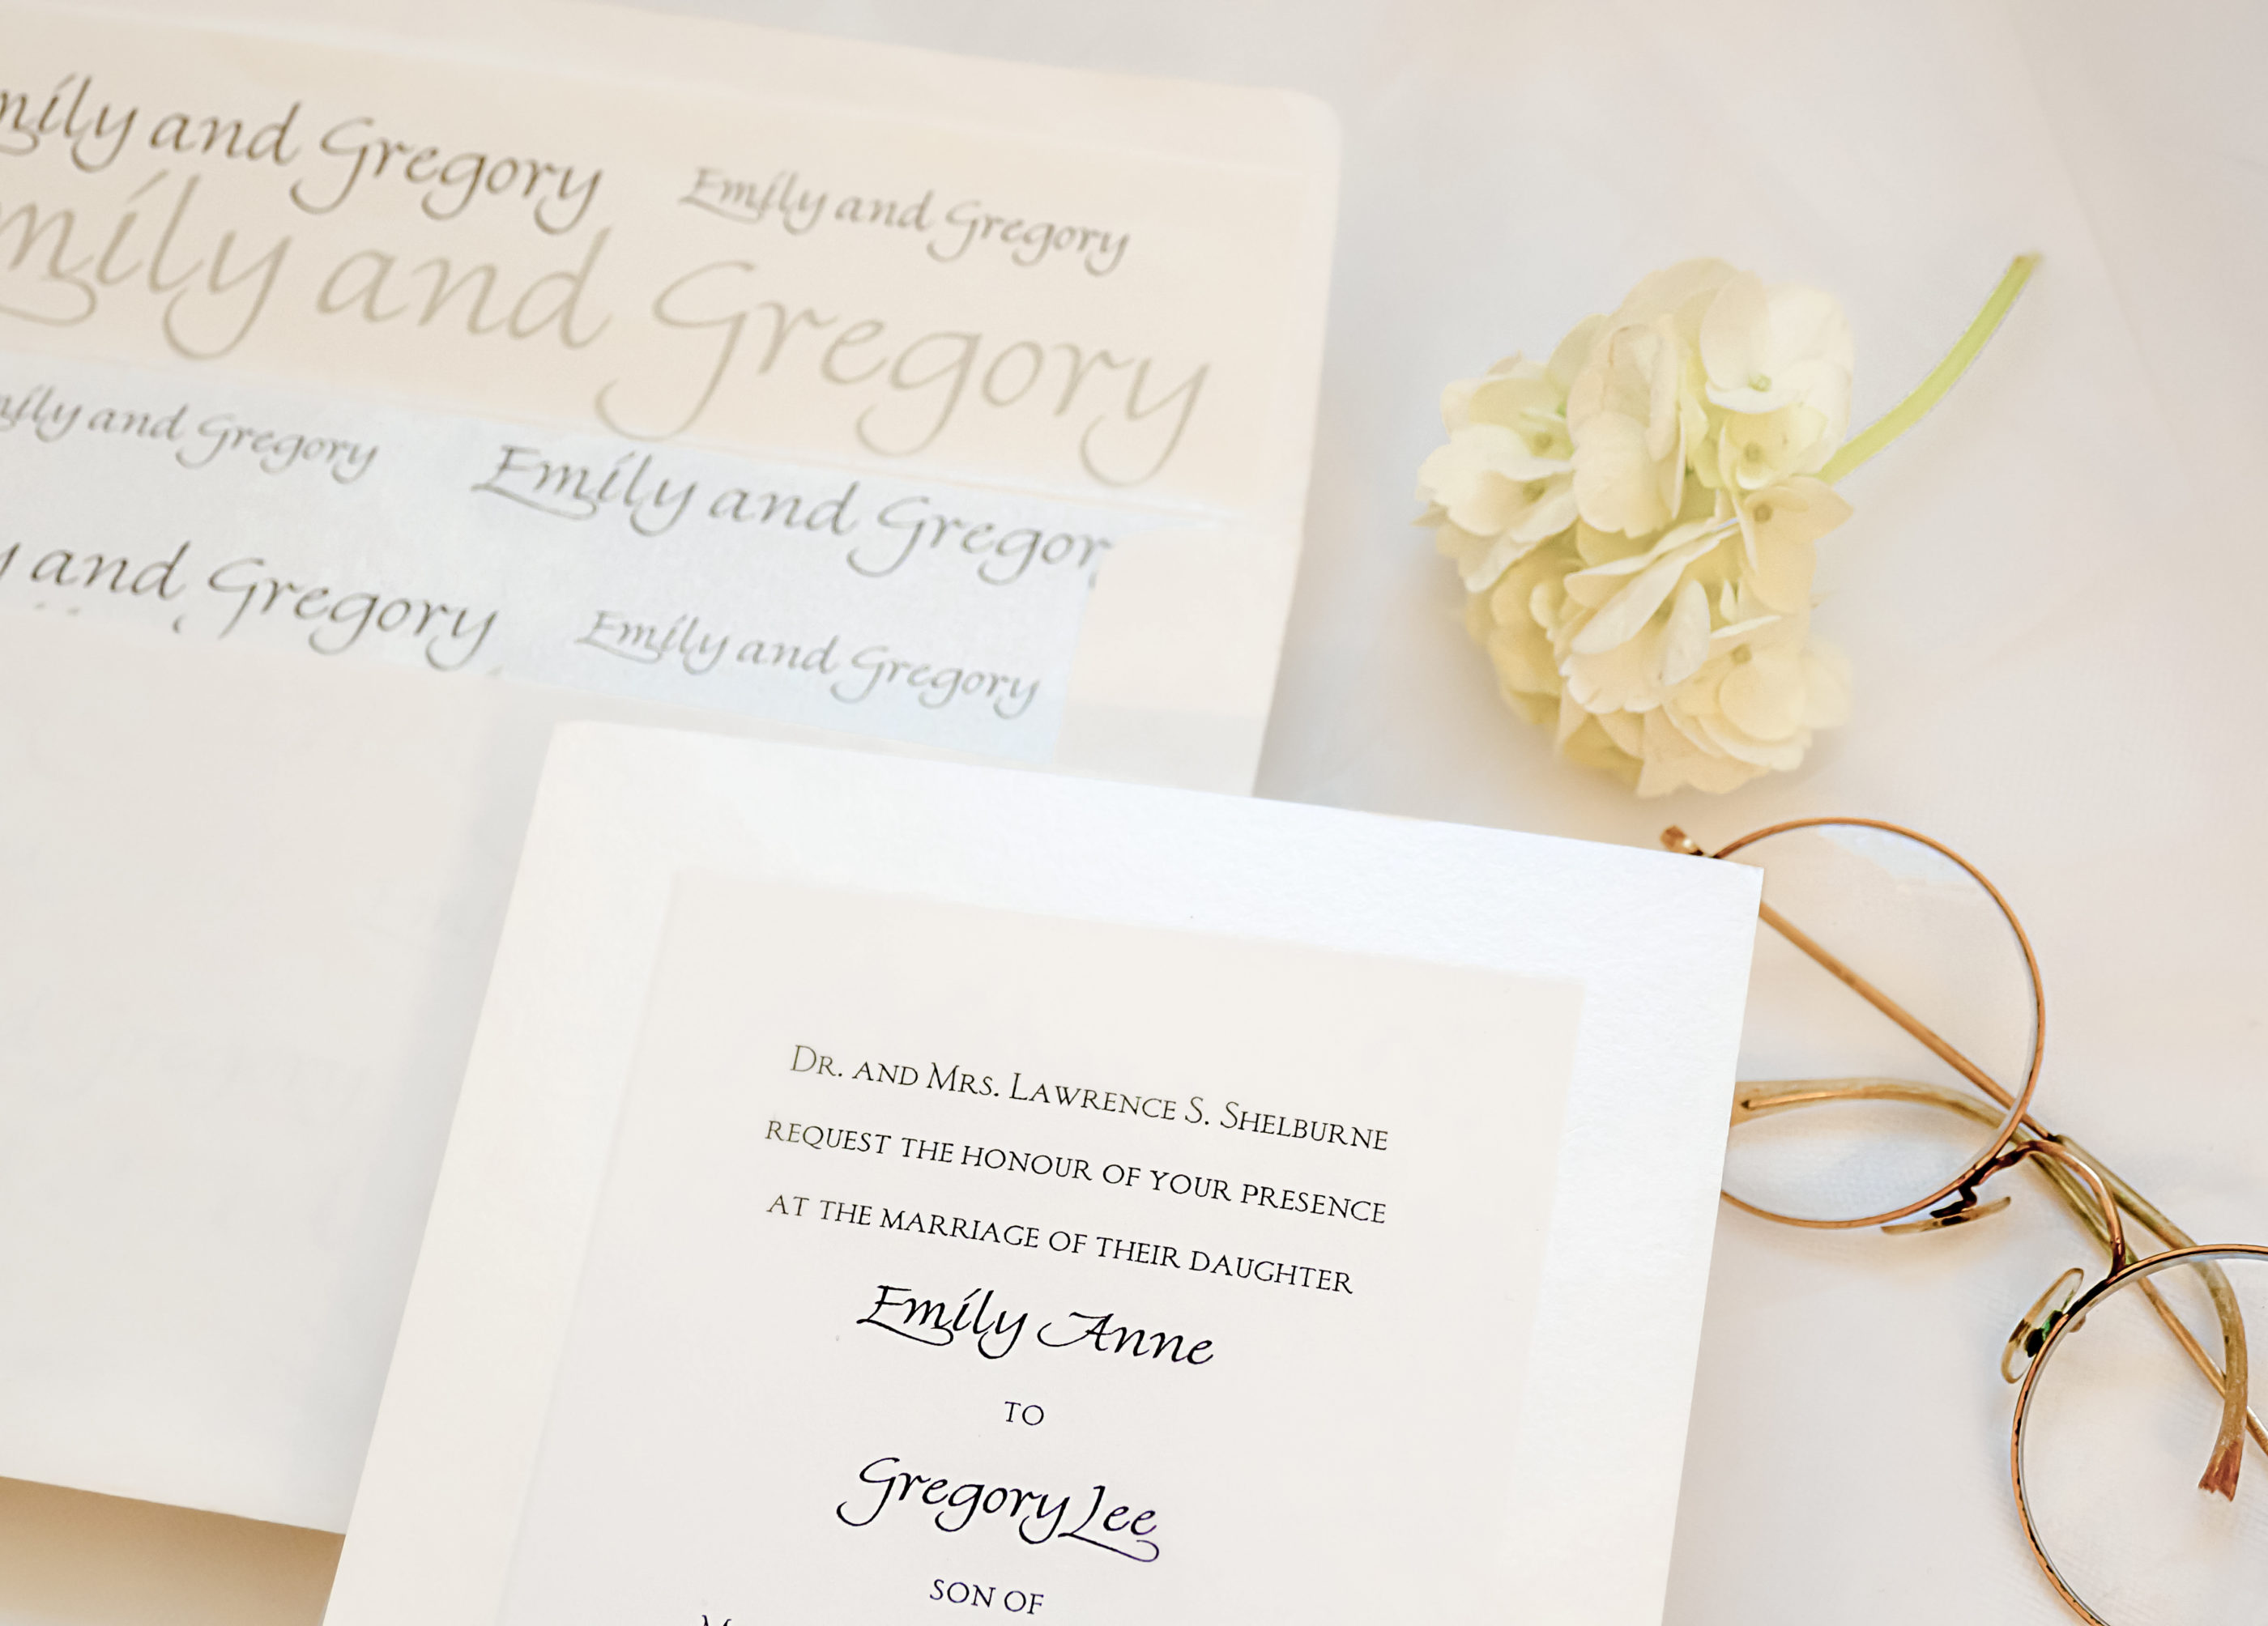 close photograph of cream colored invitation and envelope with bride and groom's names on inside of envelope